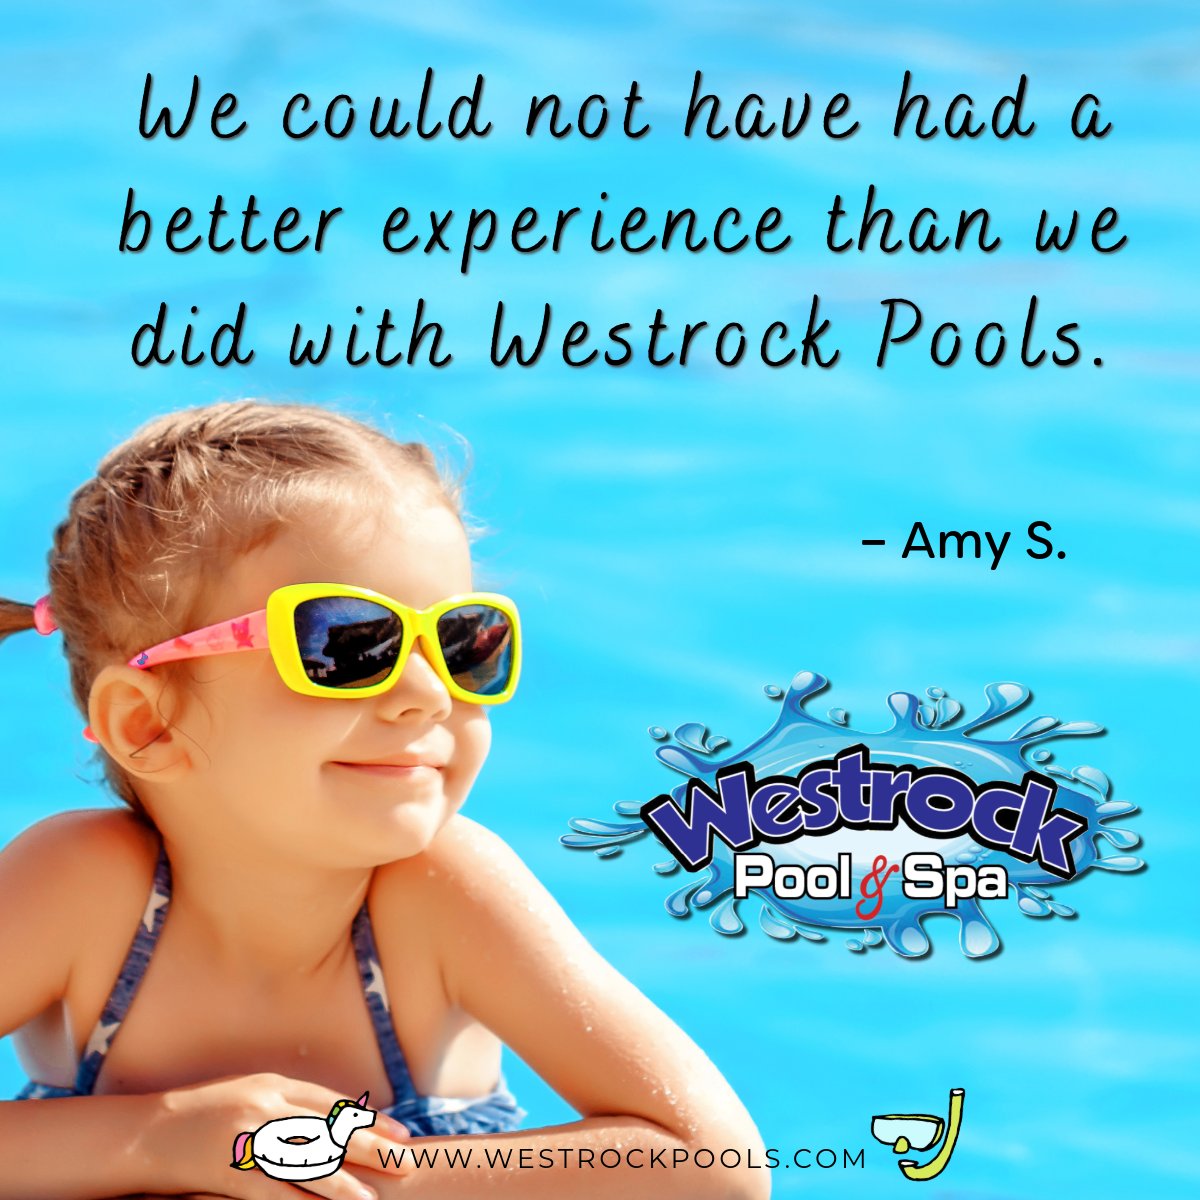 Thank you for the great review, Amy! 🌟 At Westrock, we work hard so you don't have to. Thank you for working with us!

#HappyCustomer #PoolDreams #WestrockPools #WestrockExperience #CustomerSatisfaction 🏊‍♂️